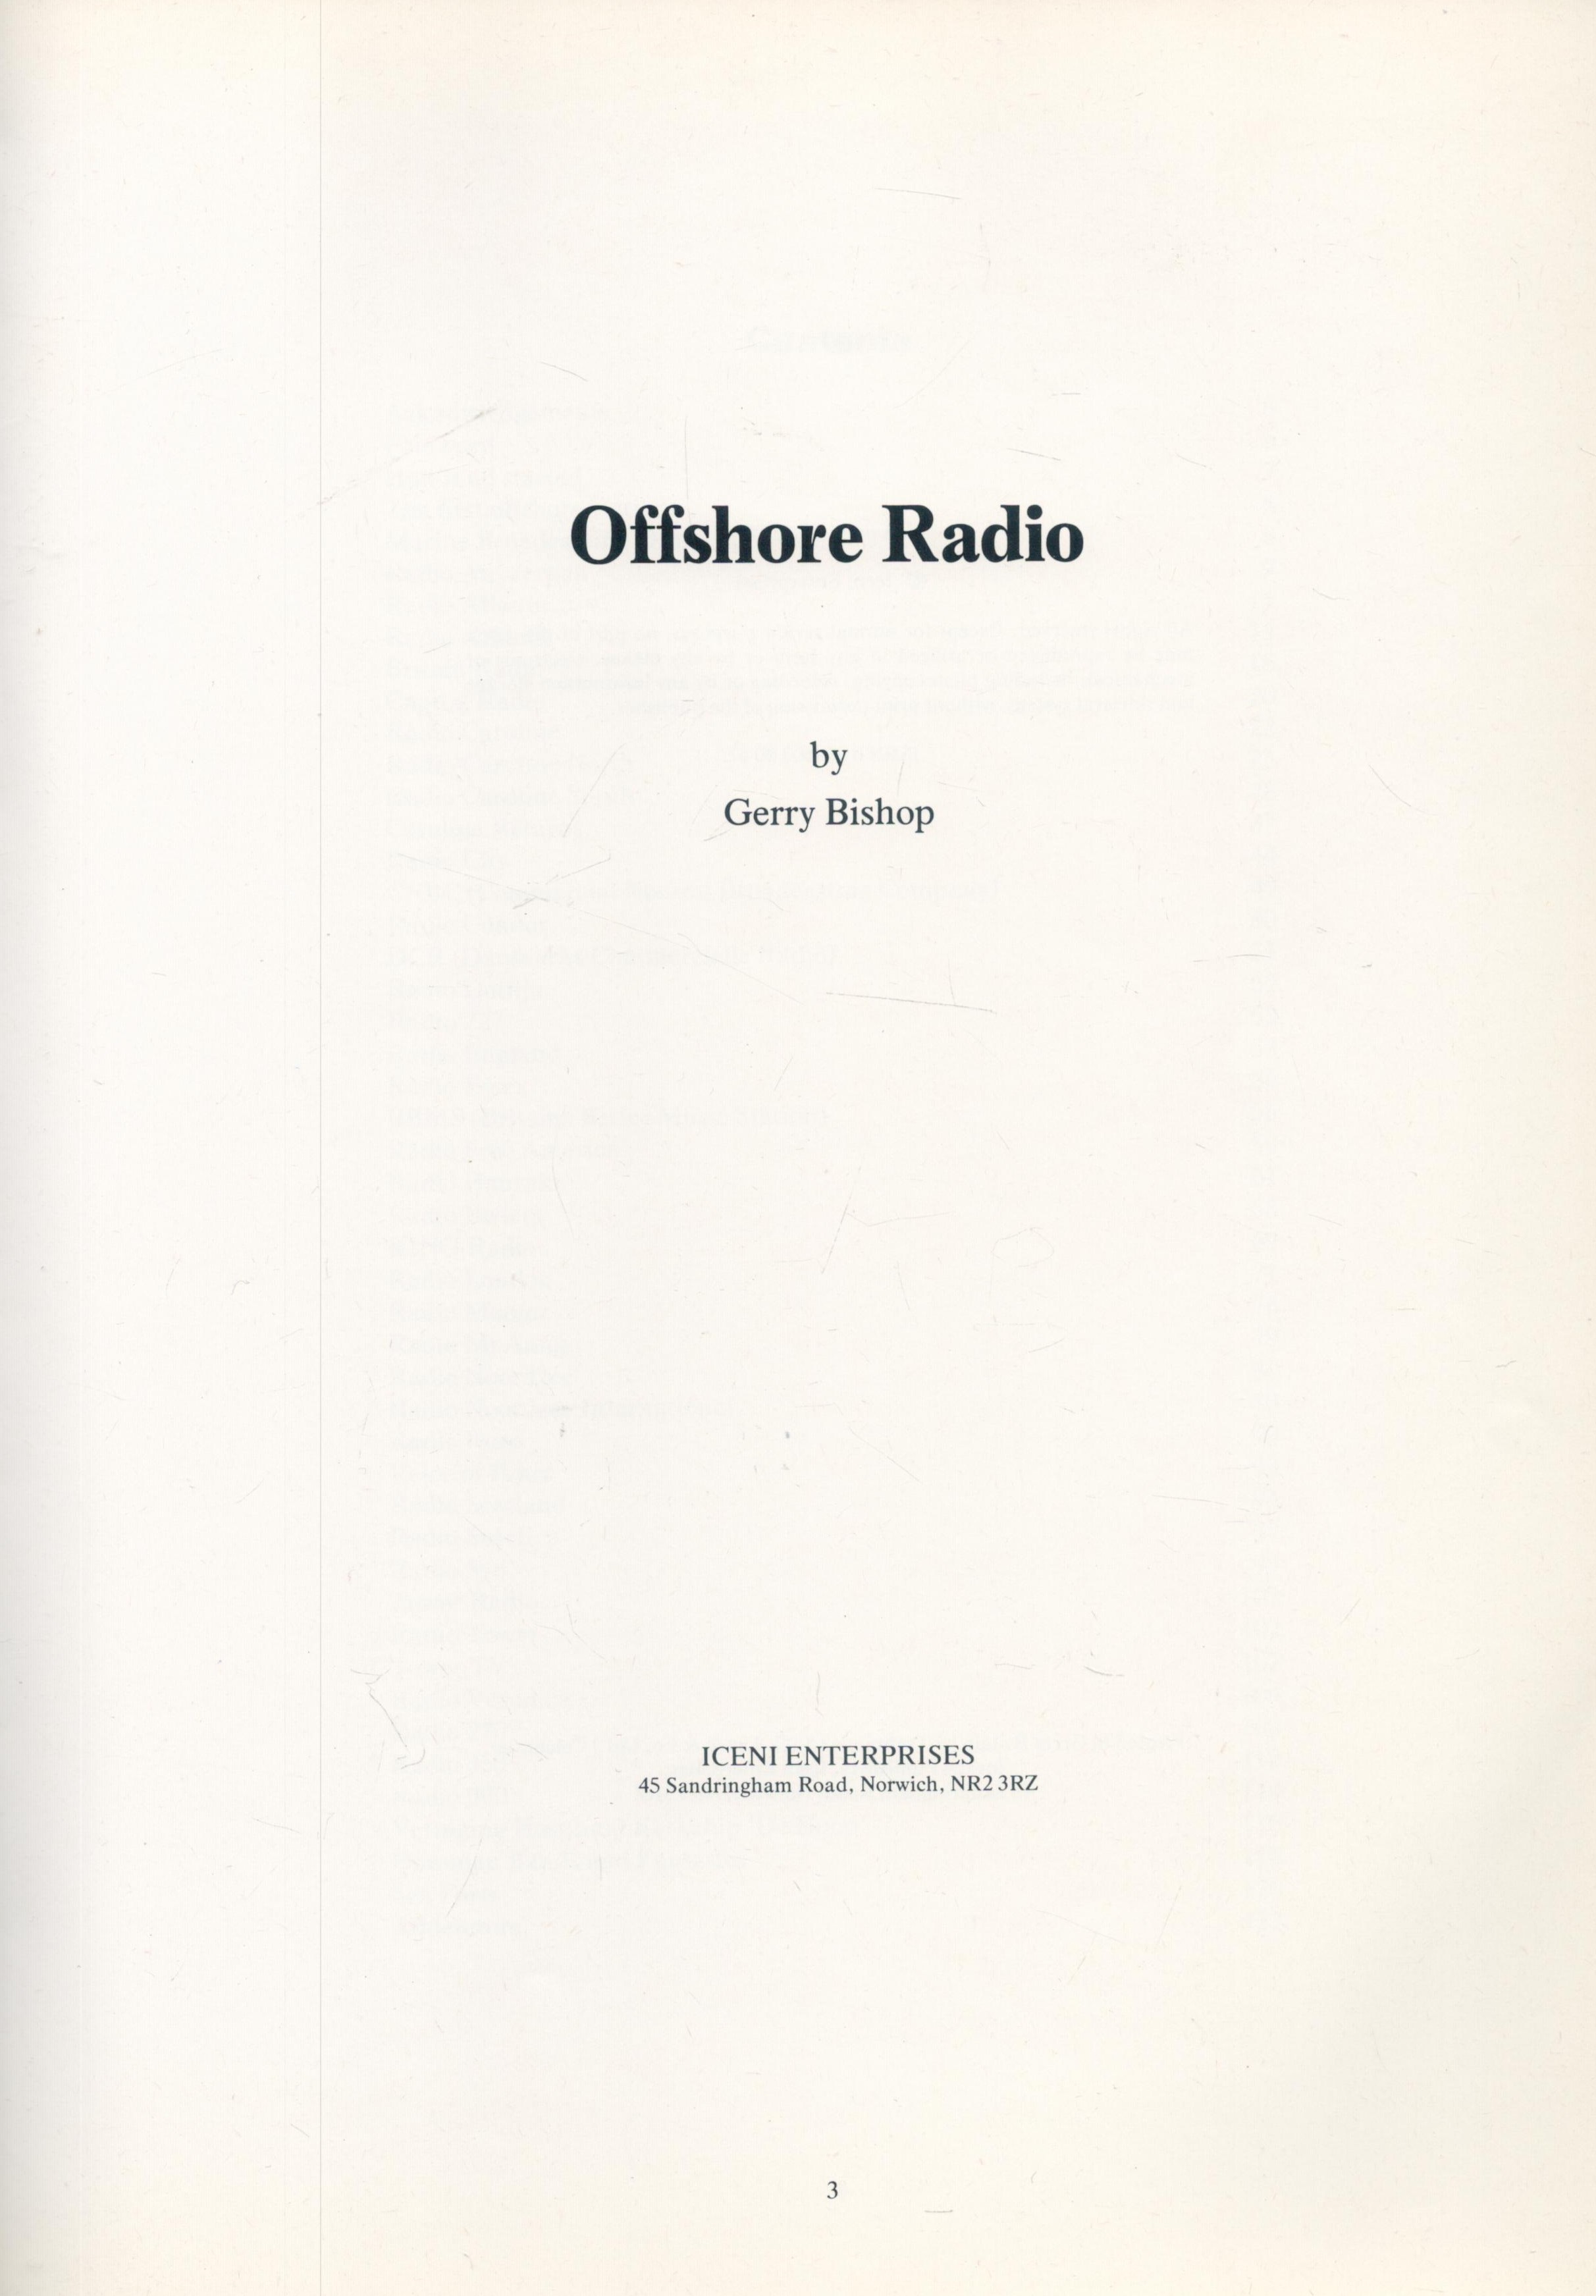 Offshore Radio by Gerry Bishop 1975 First Edition Softback Book with 125 pages published by Iceni - Image 2 of 3